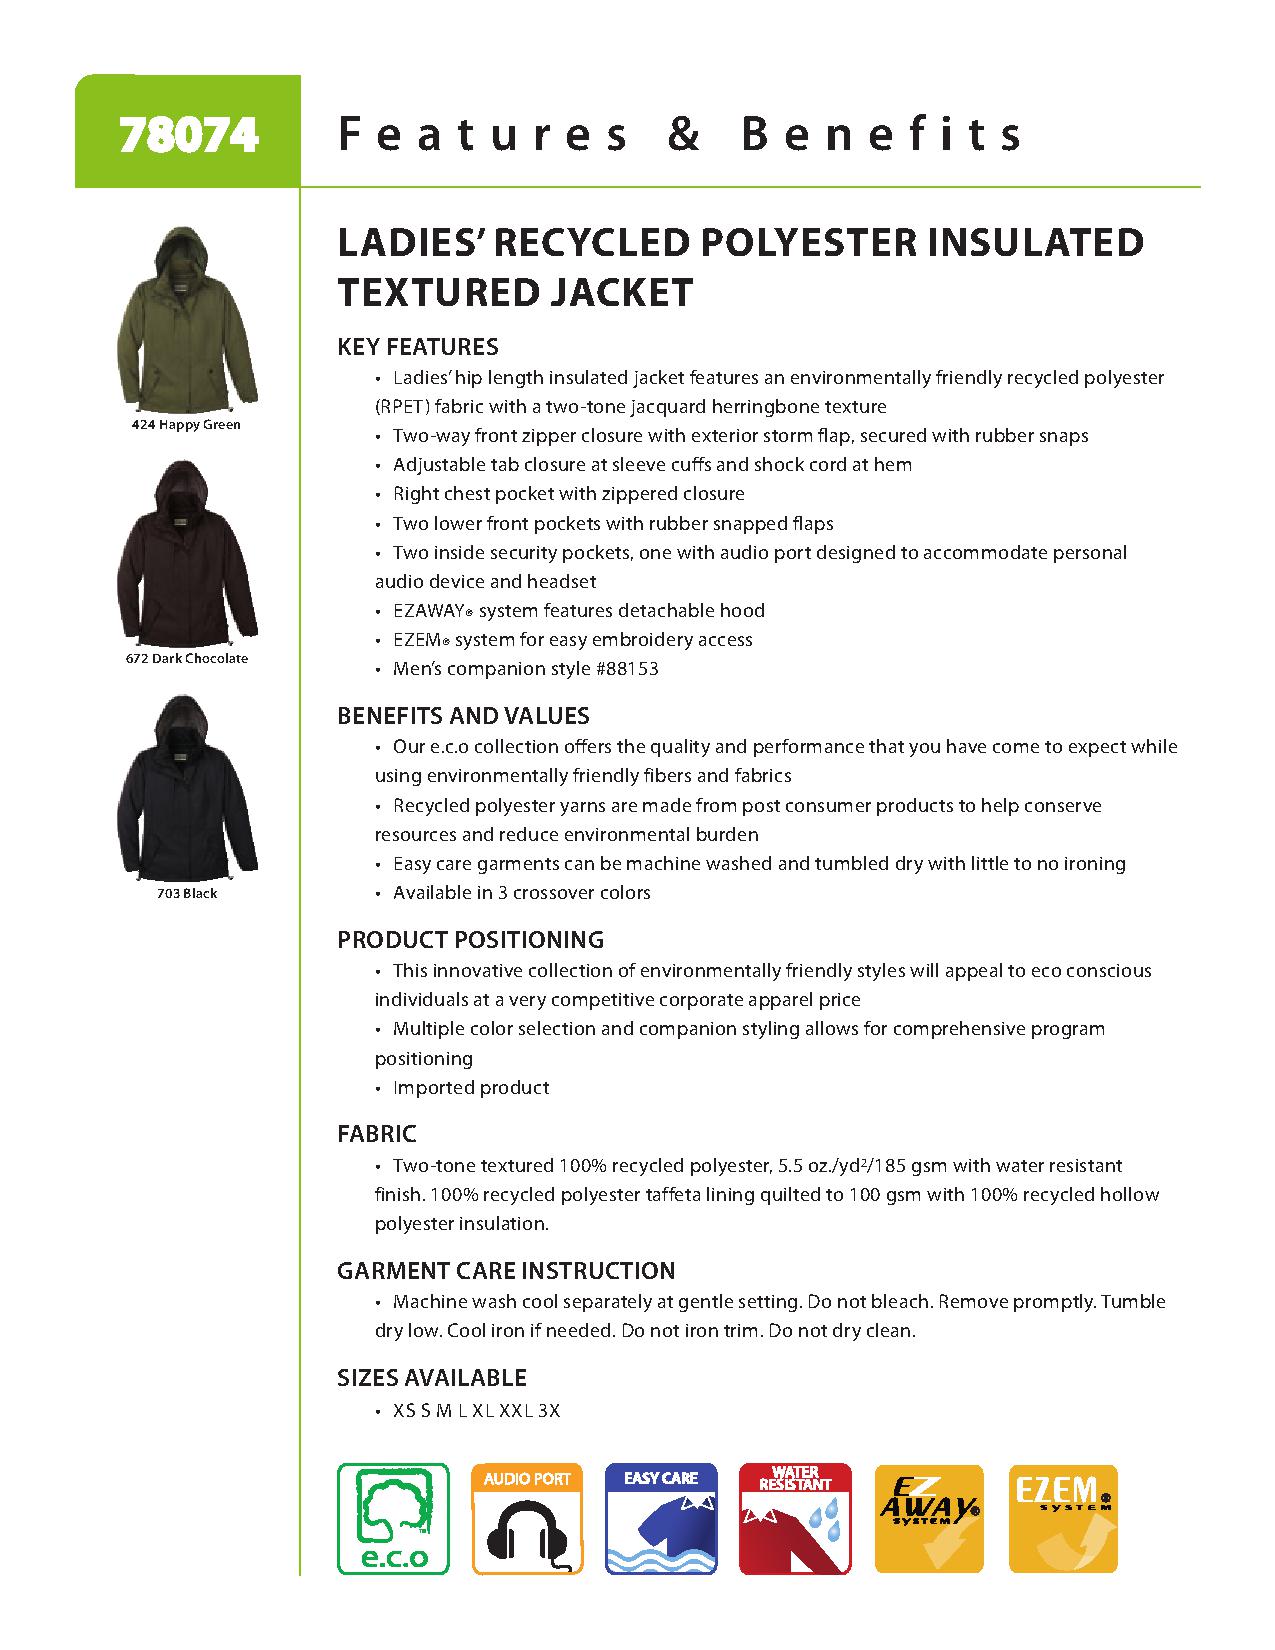 Ash City e.c.o Outerwear 78074 - Ladies' Recycled Polyester Insulated Textured Jacket